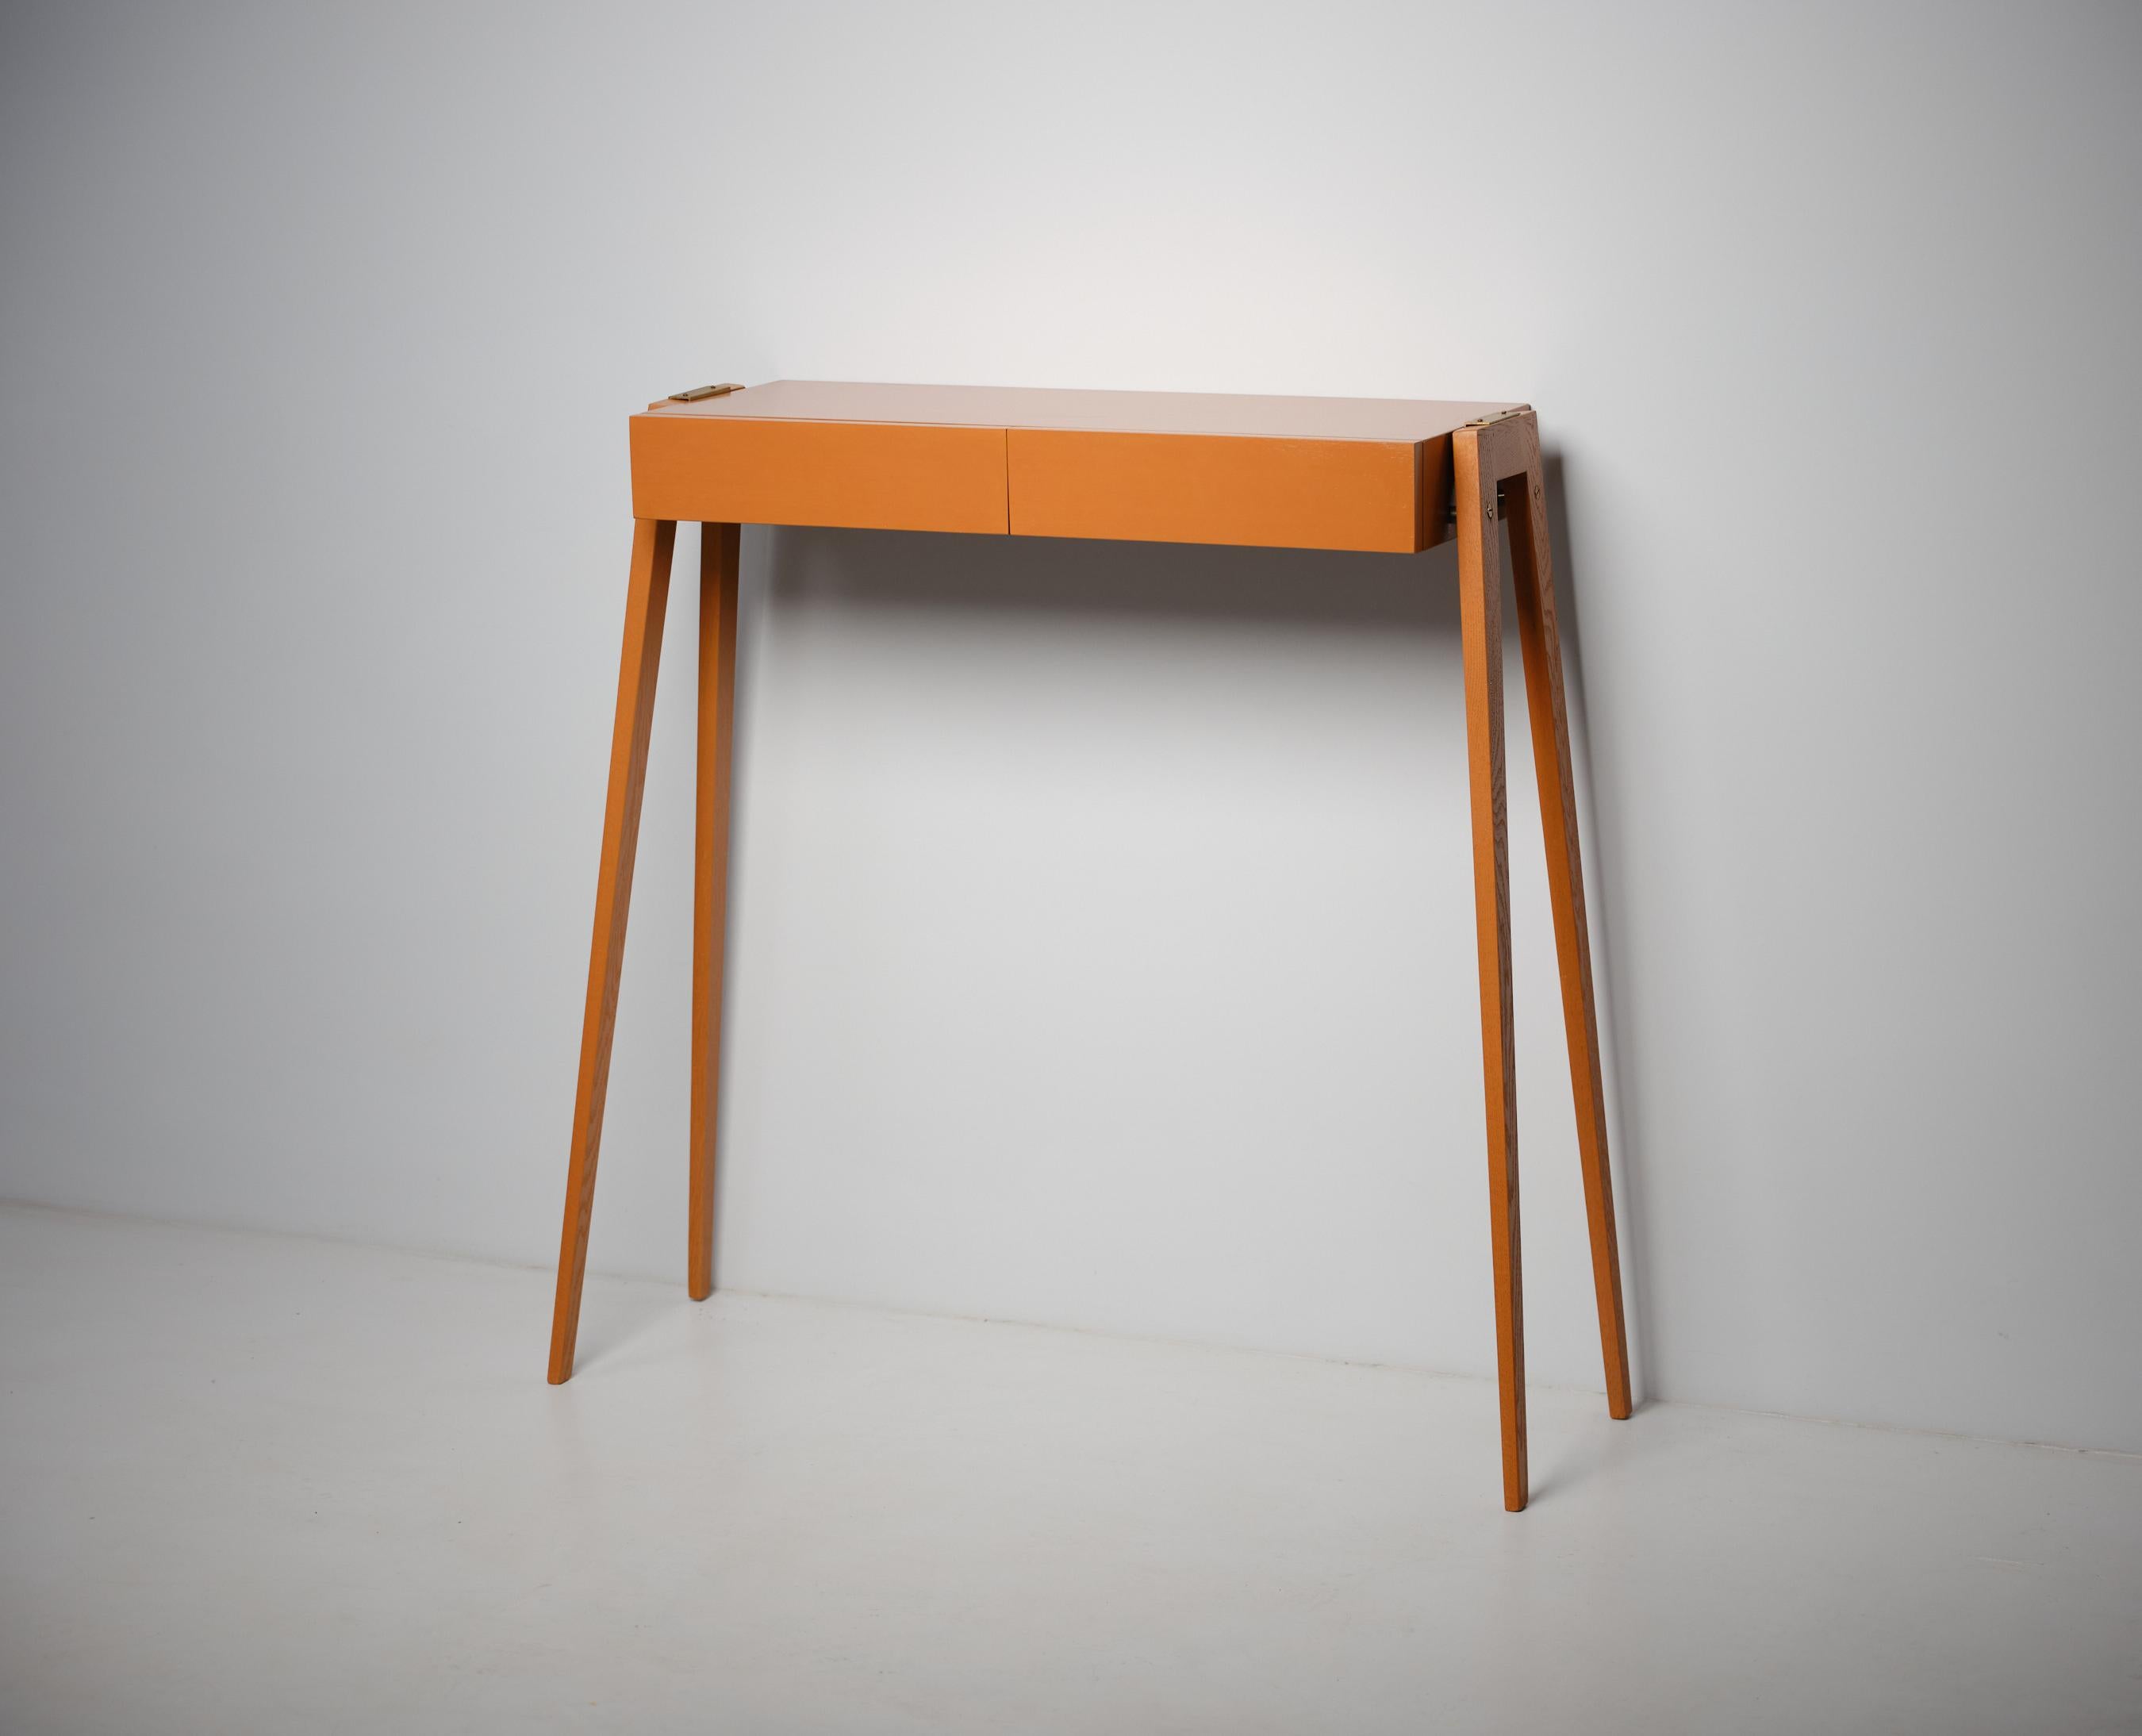 Mid-Century Modern Italian Design Console from the 1950s: Restyled Elegance in Modern Rust Orange